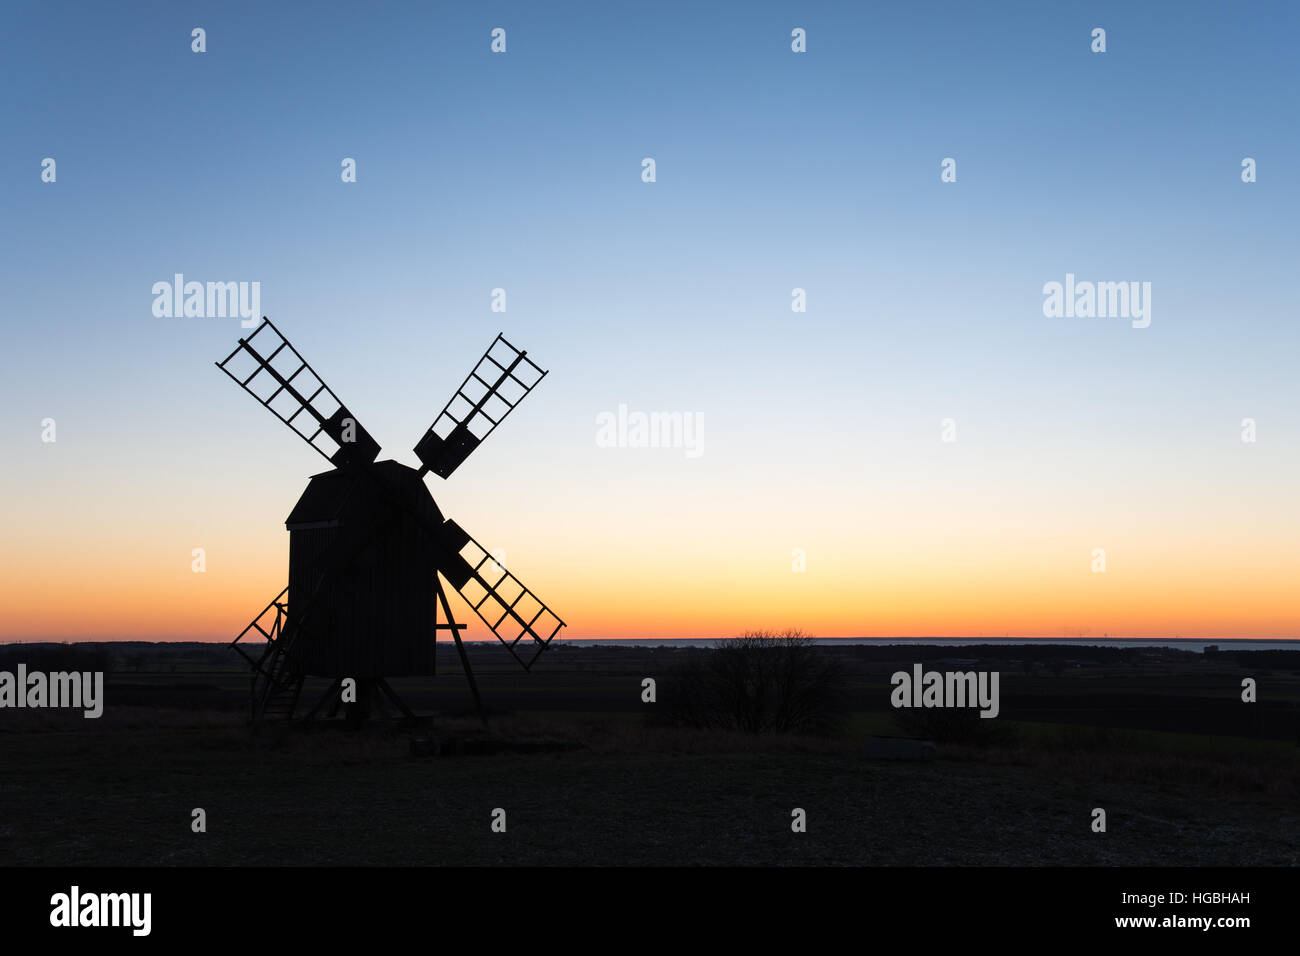 Old traditional windmill silhouette at the swedish island Oland in the Baltic Sea Stock Photo